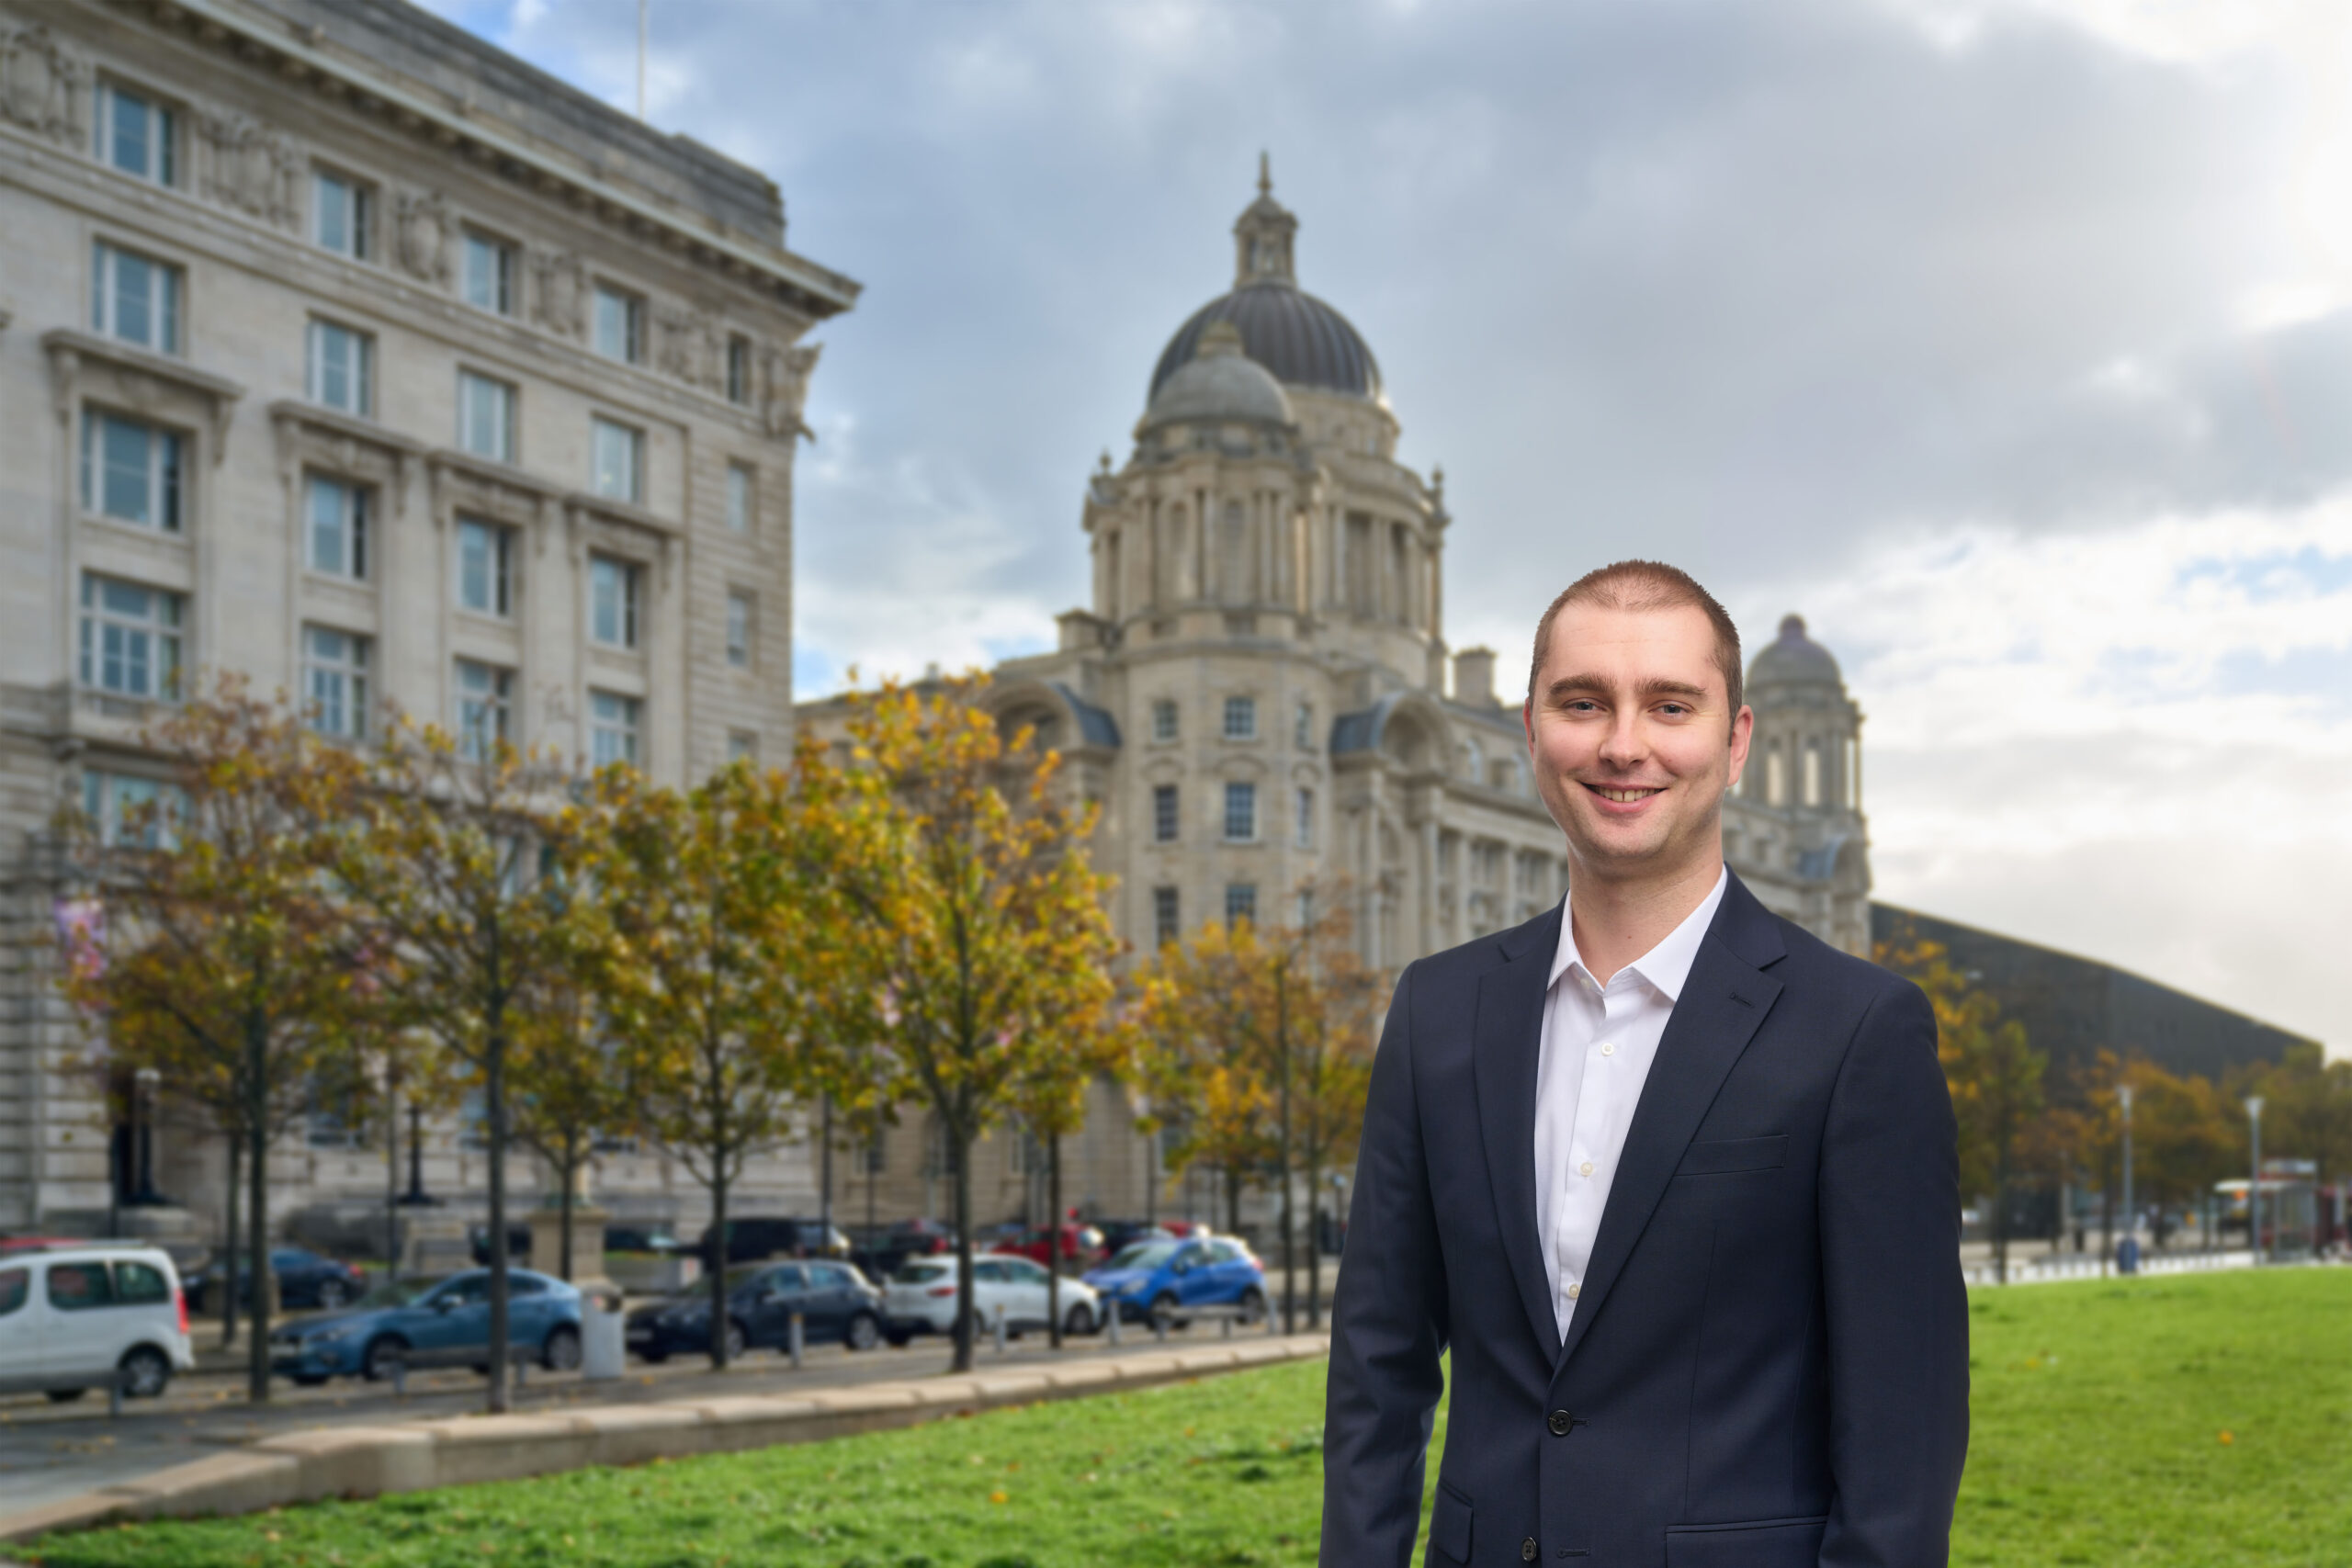 A man in a navy suit jacket and white shirt is standing and smiling in front of the Port of Liverpool building.